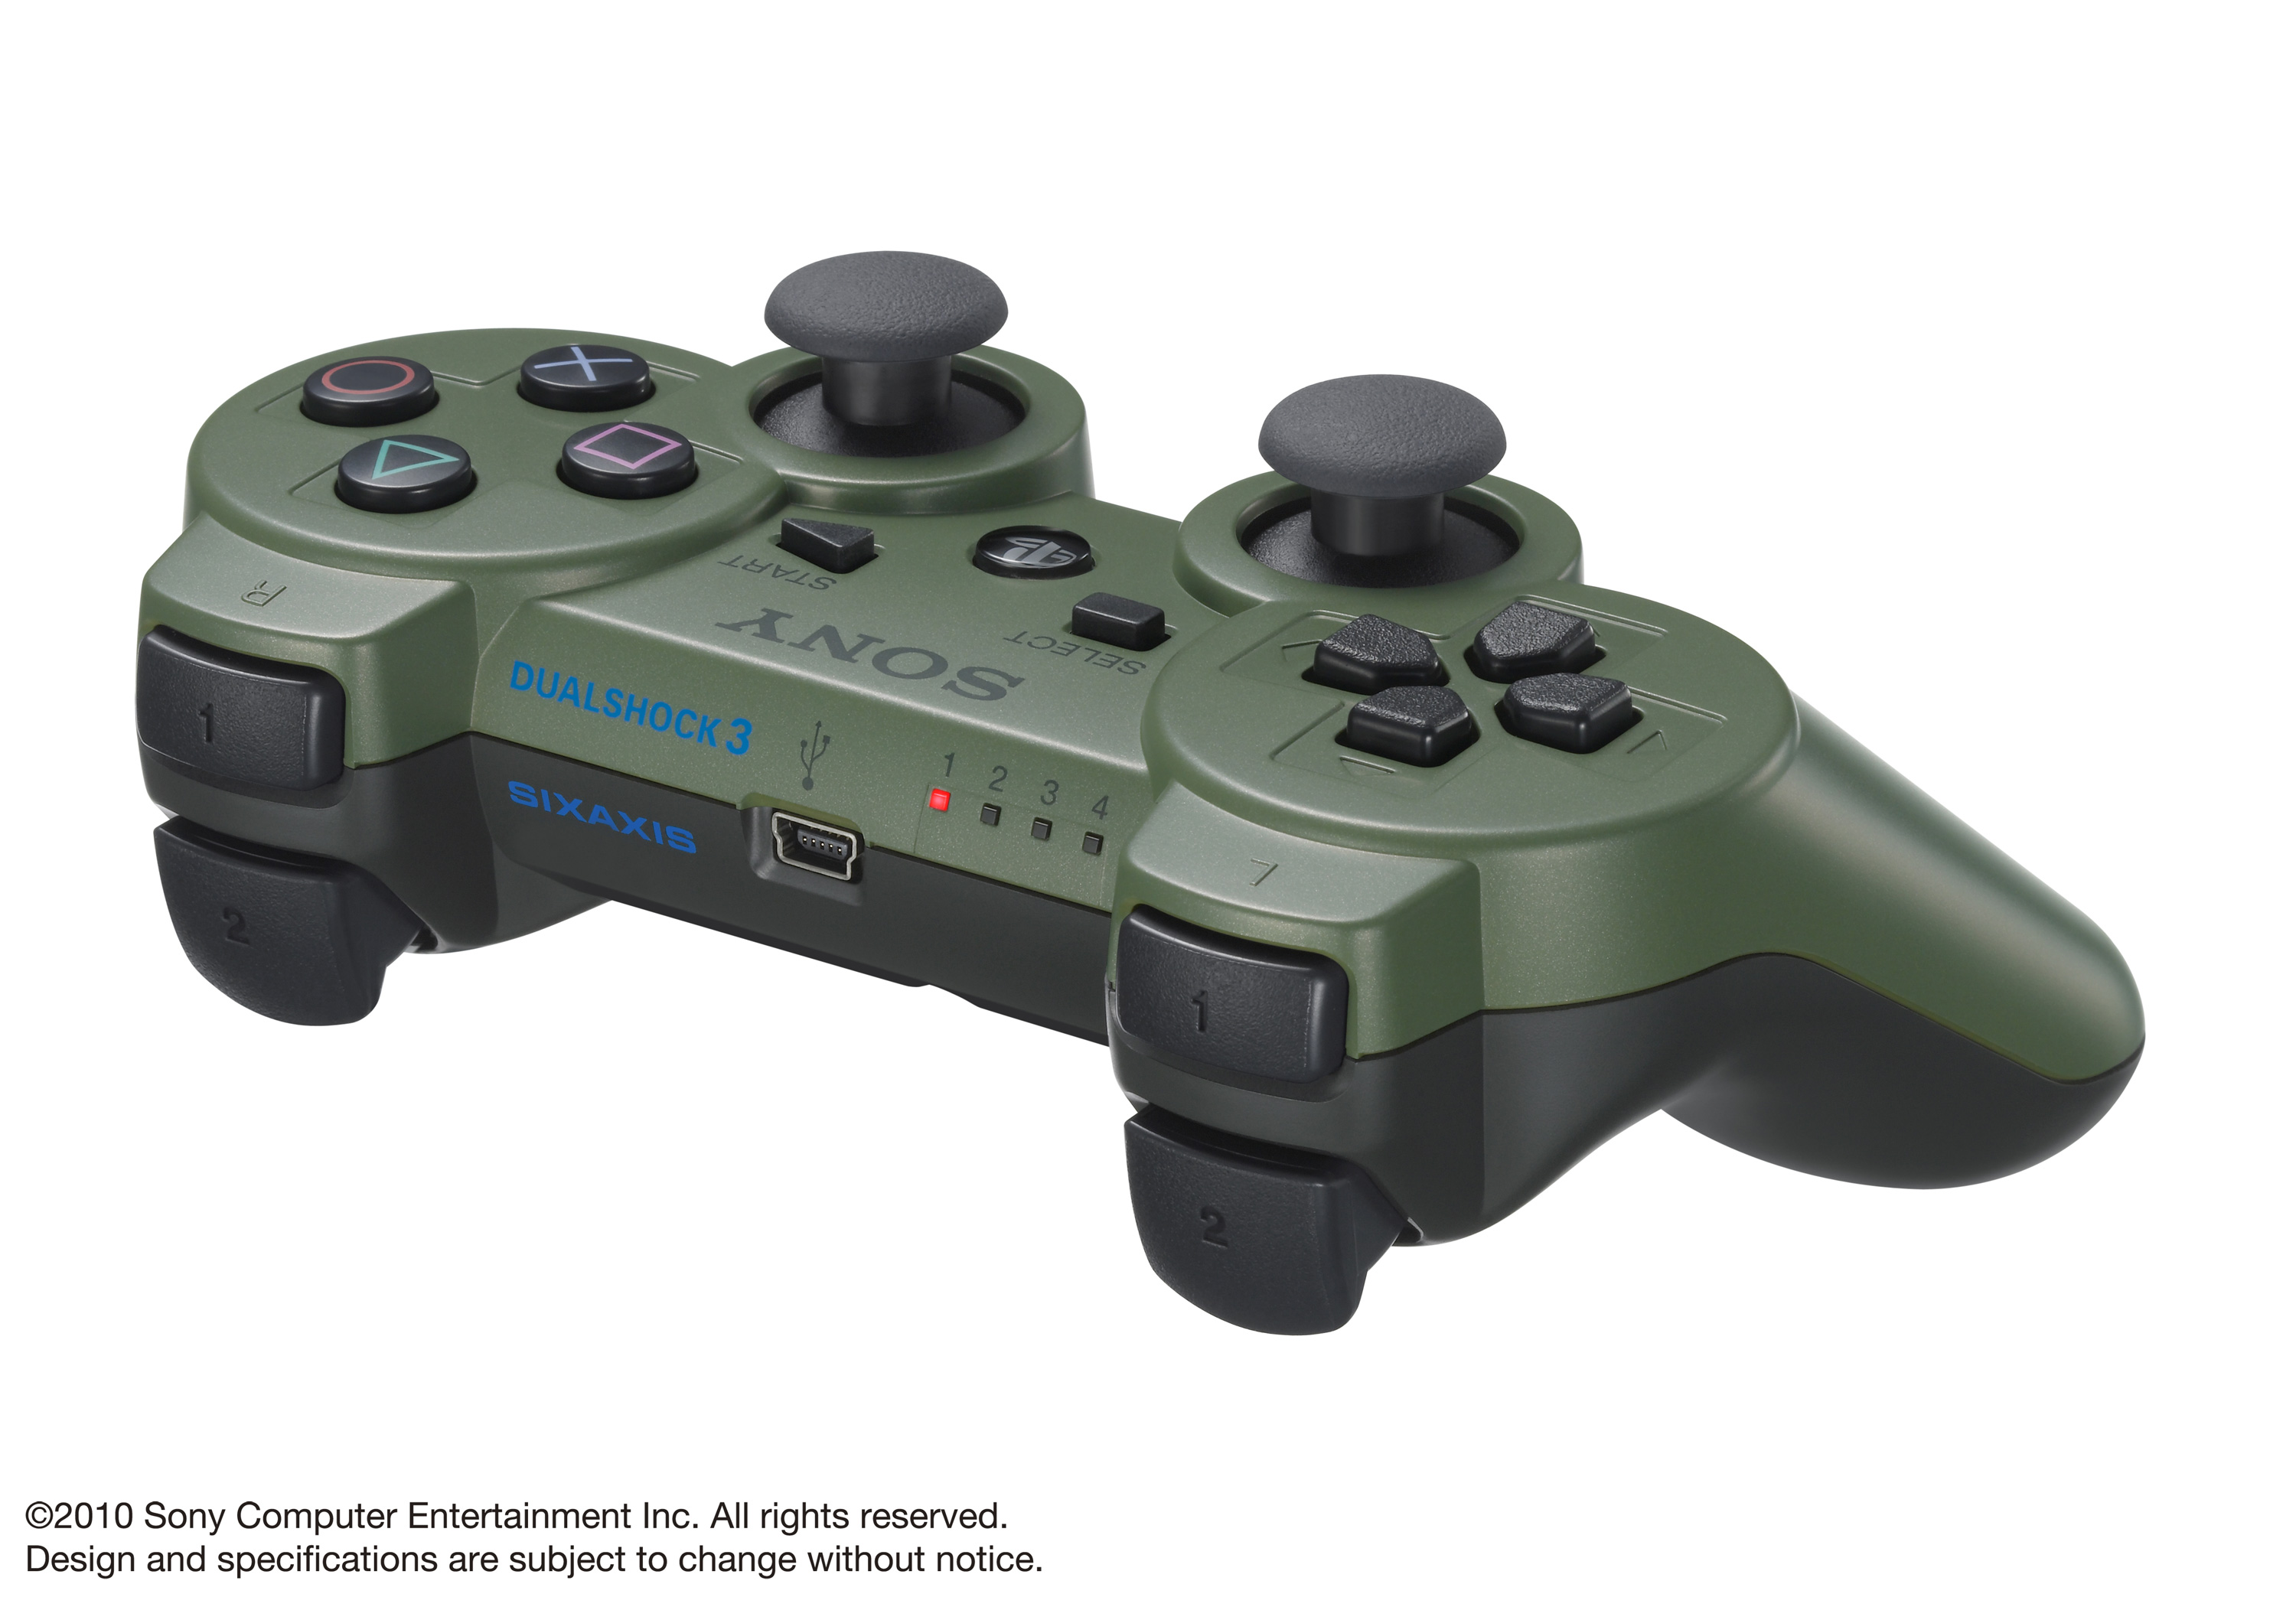 http://www.hitechreview.com/gallery/playstation-move-sharp-shooter-attachment-and-jungle-green-ds3-controller/jungle-green-ds3-controller-01.jpg